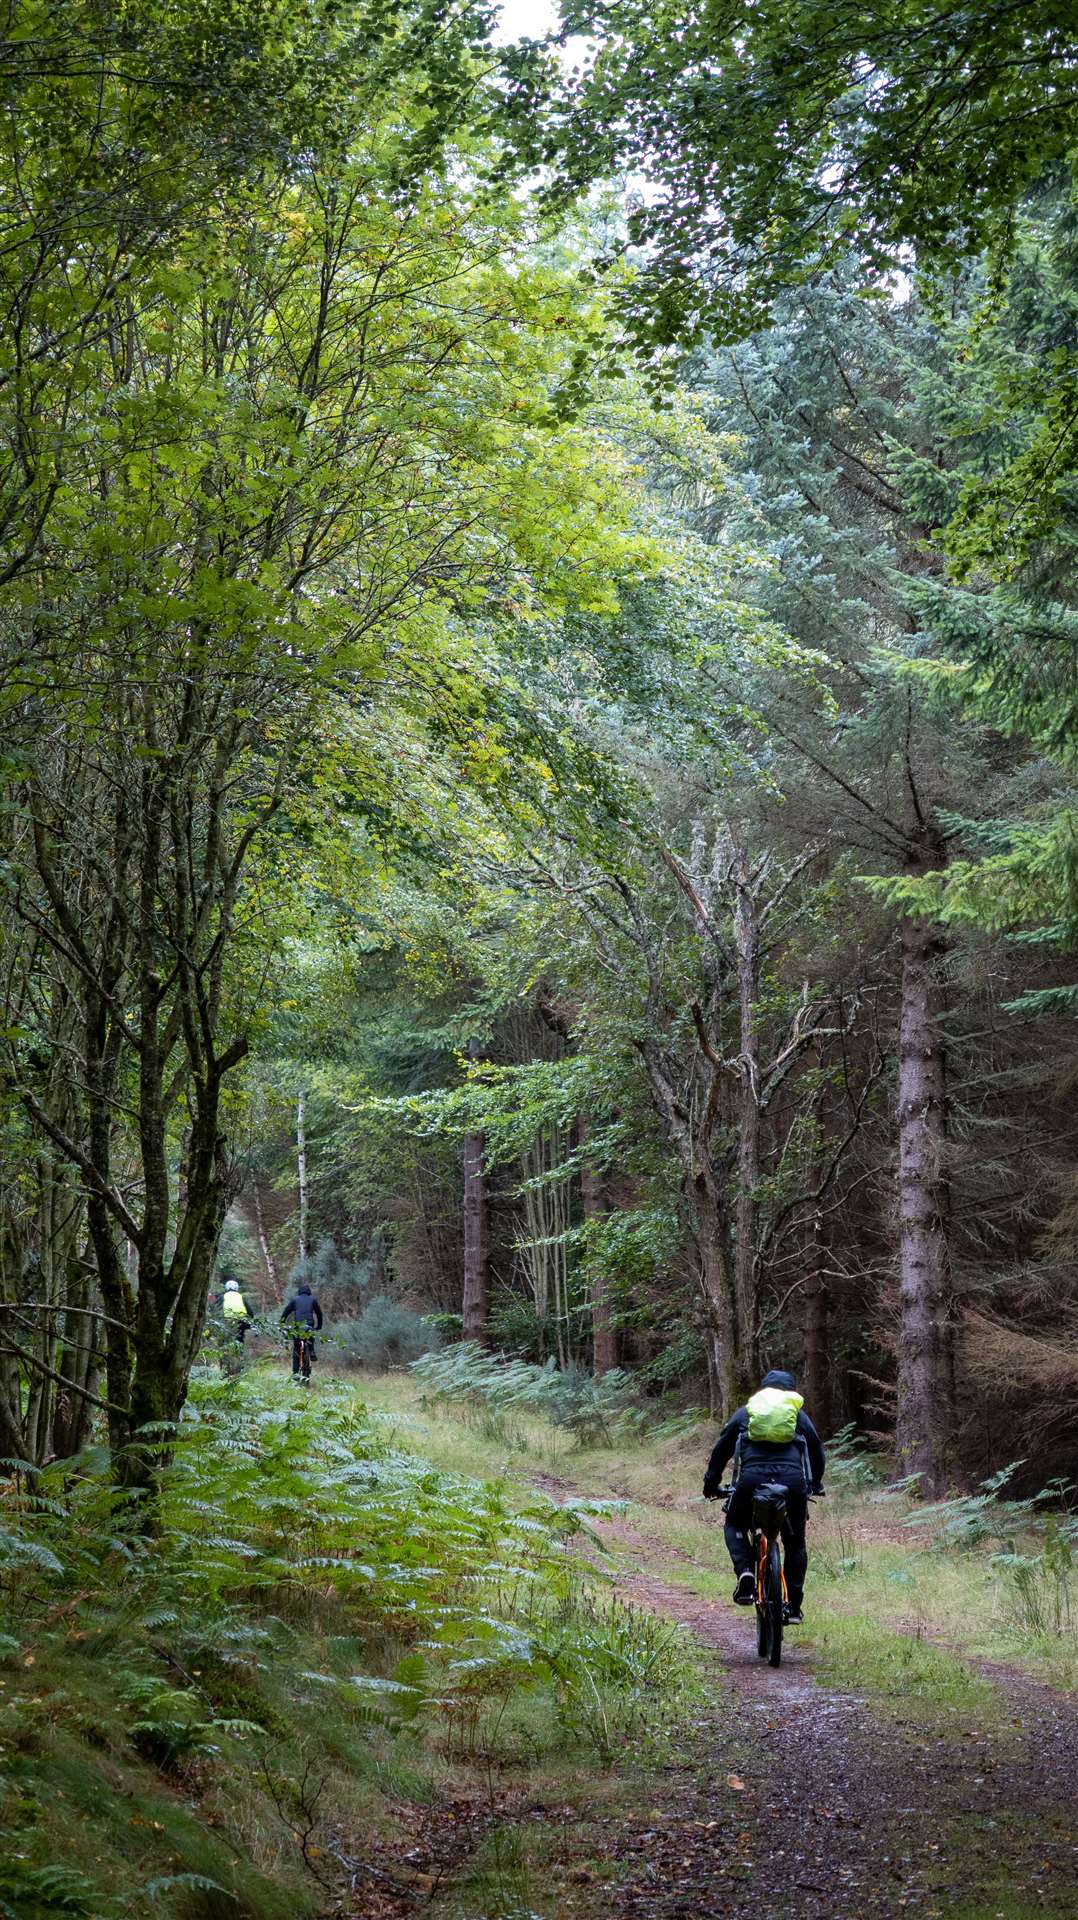 Riding through the forest in the Moray section of the Coast to Barrel route.